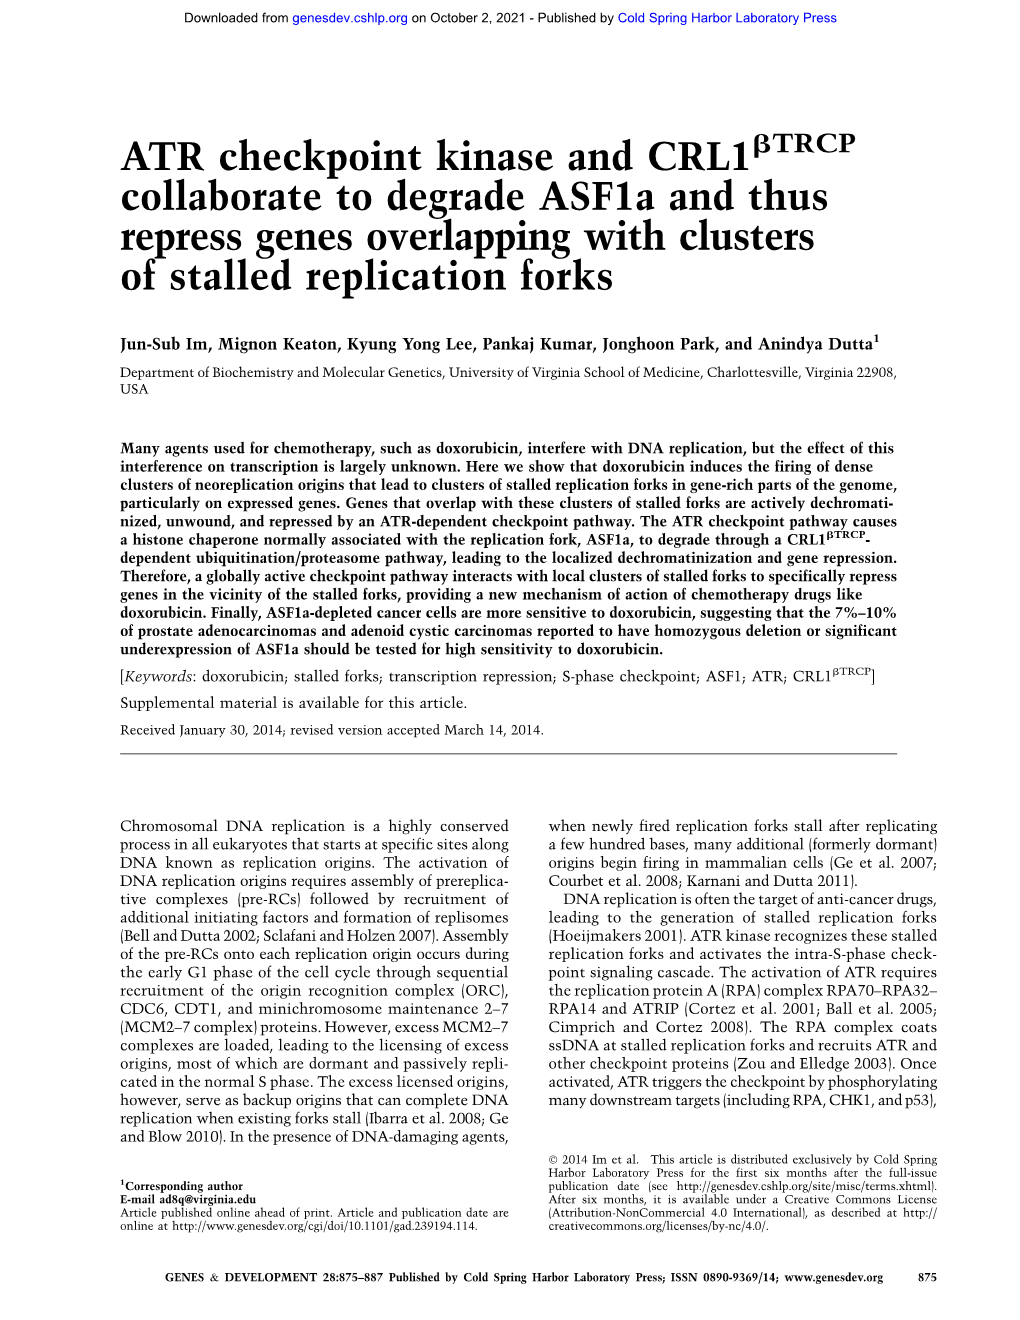 ATR Checkpoint Kinase and CRL1 Collaborate to Degrade Asf1a And